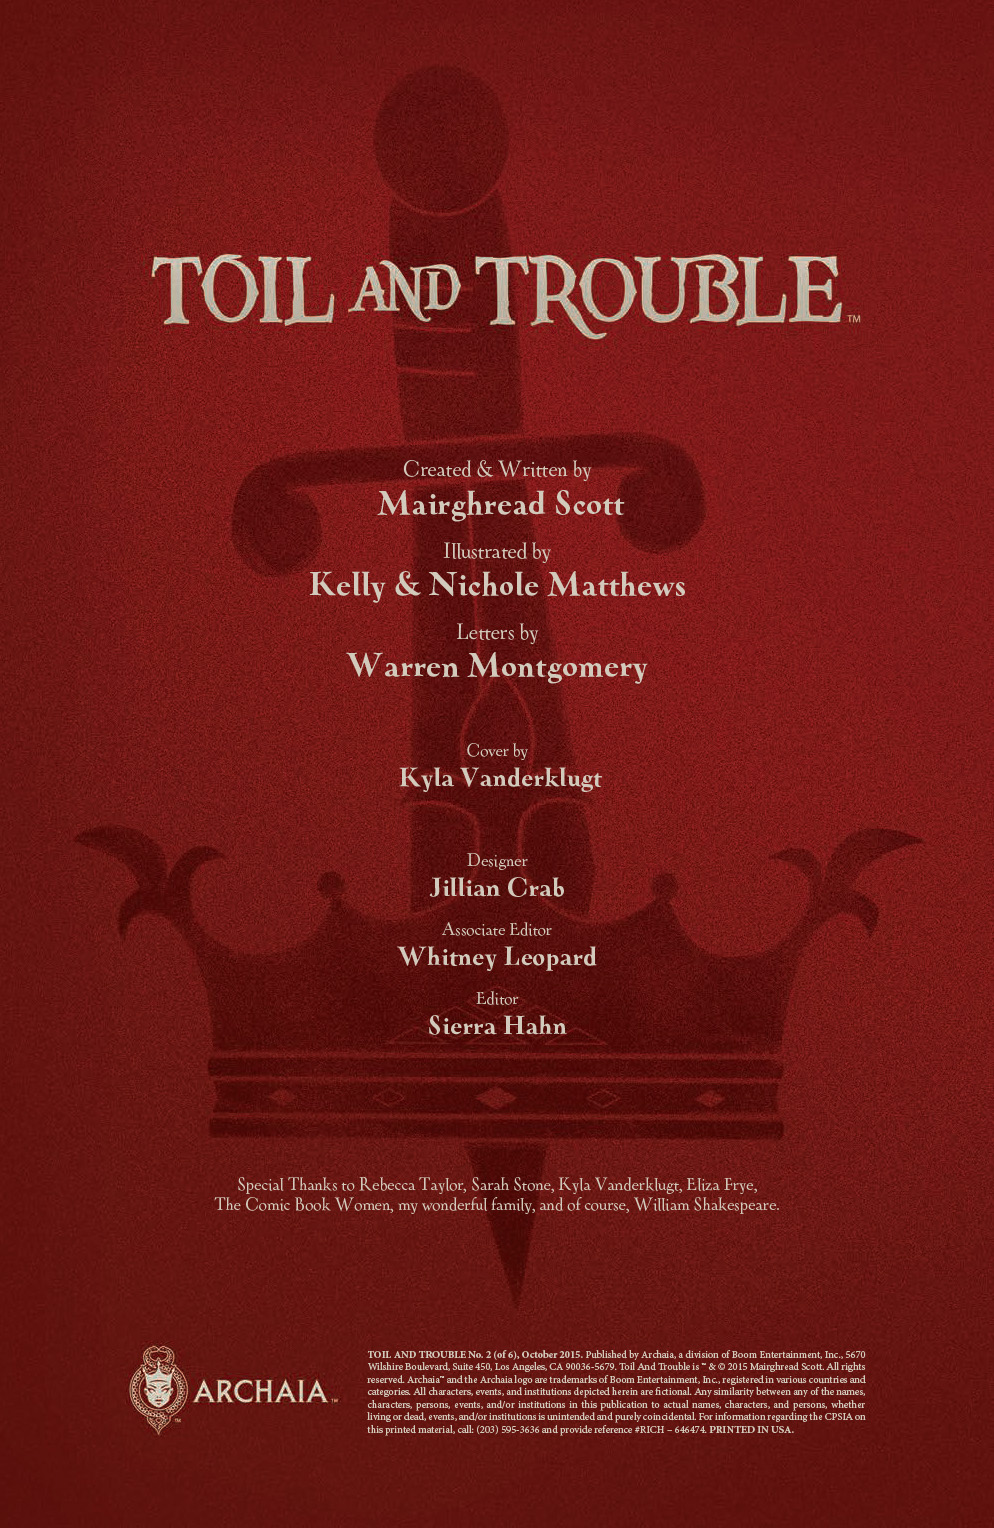 Toil and Trouble Issue 2 Credits